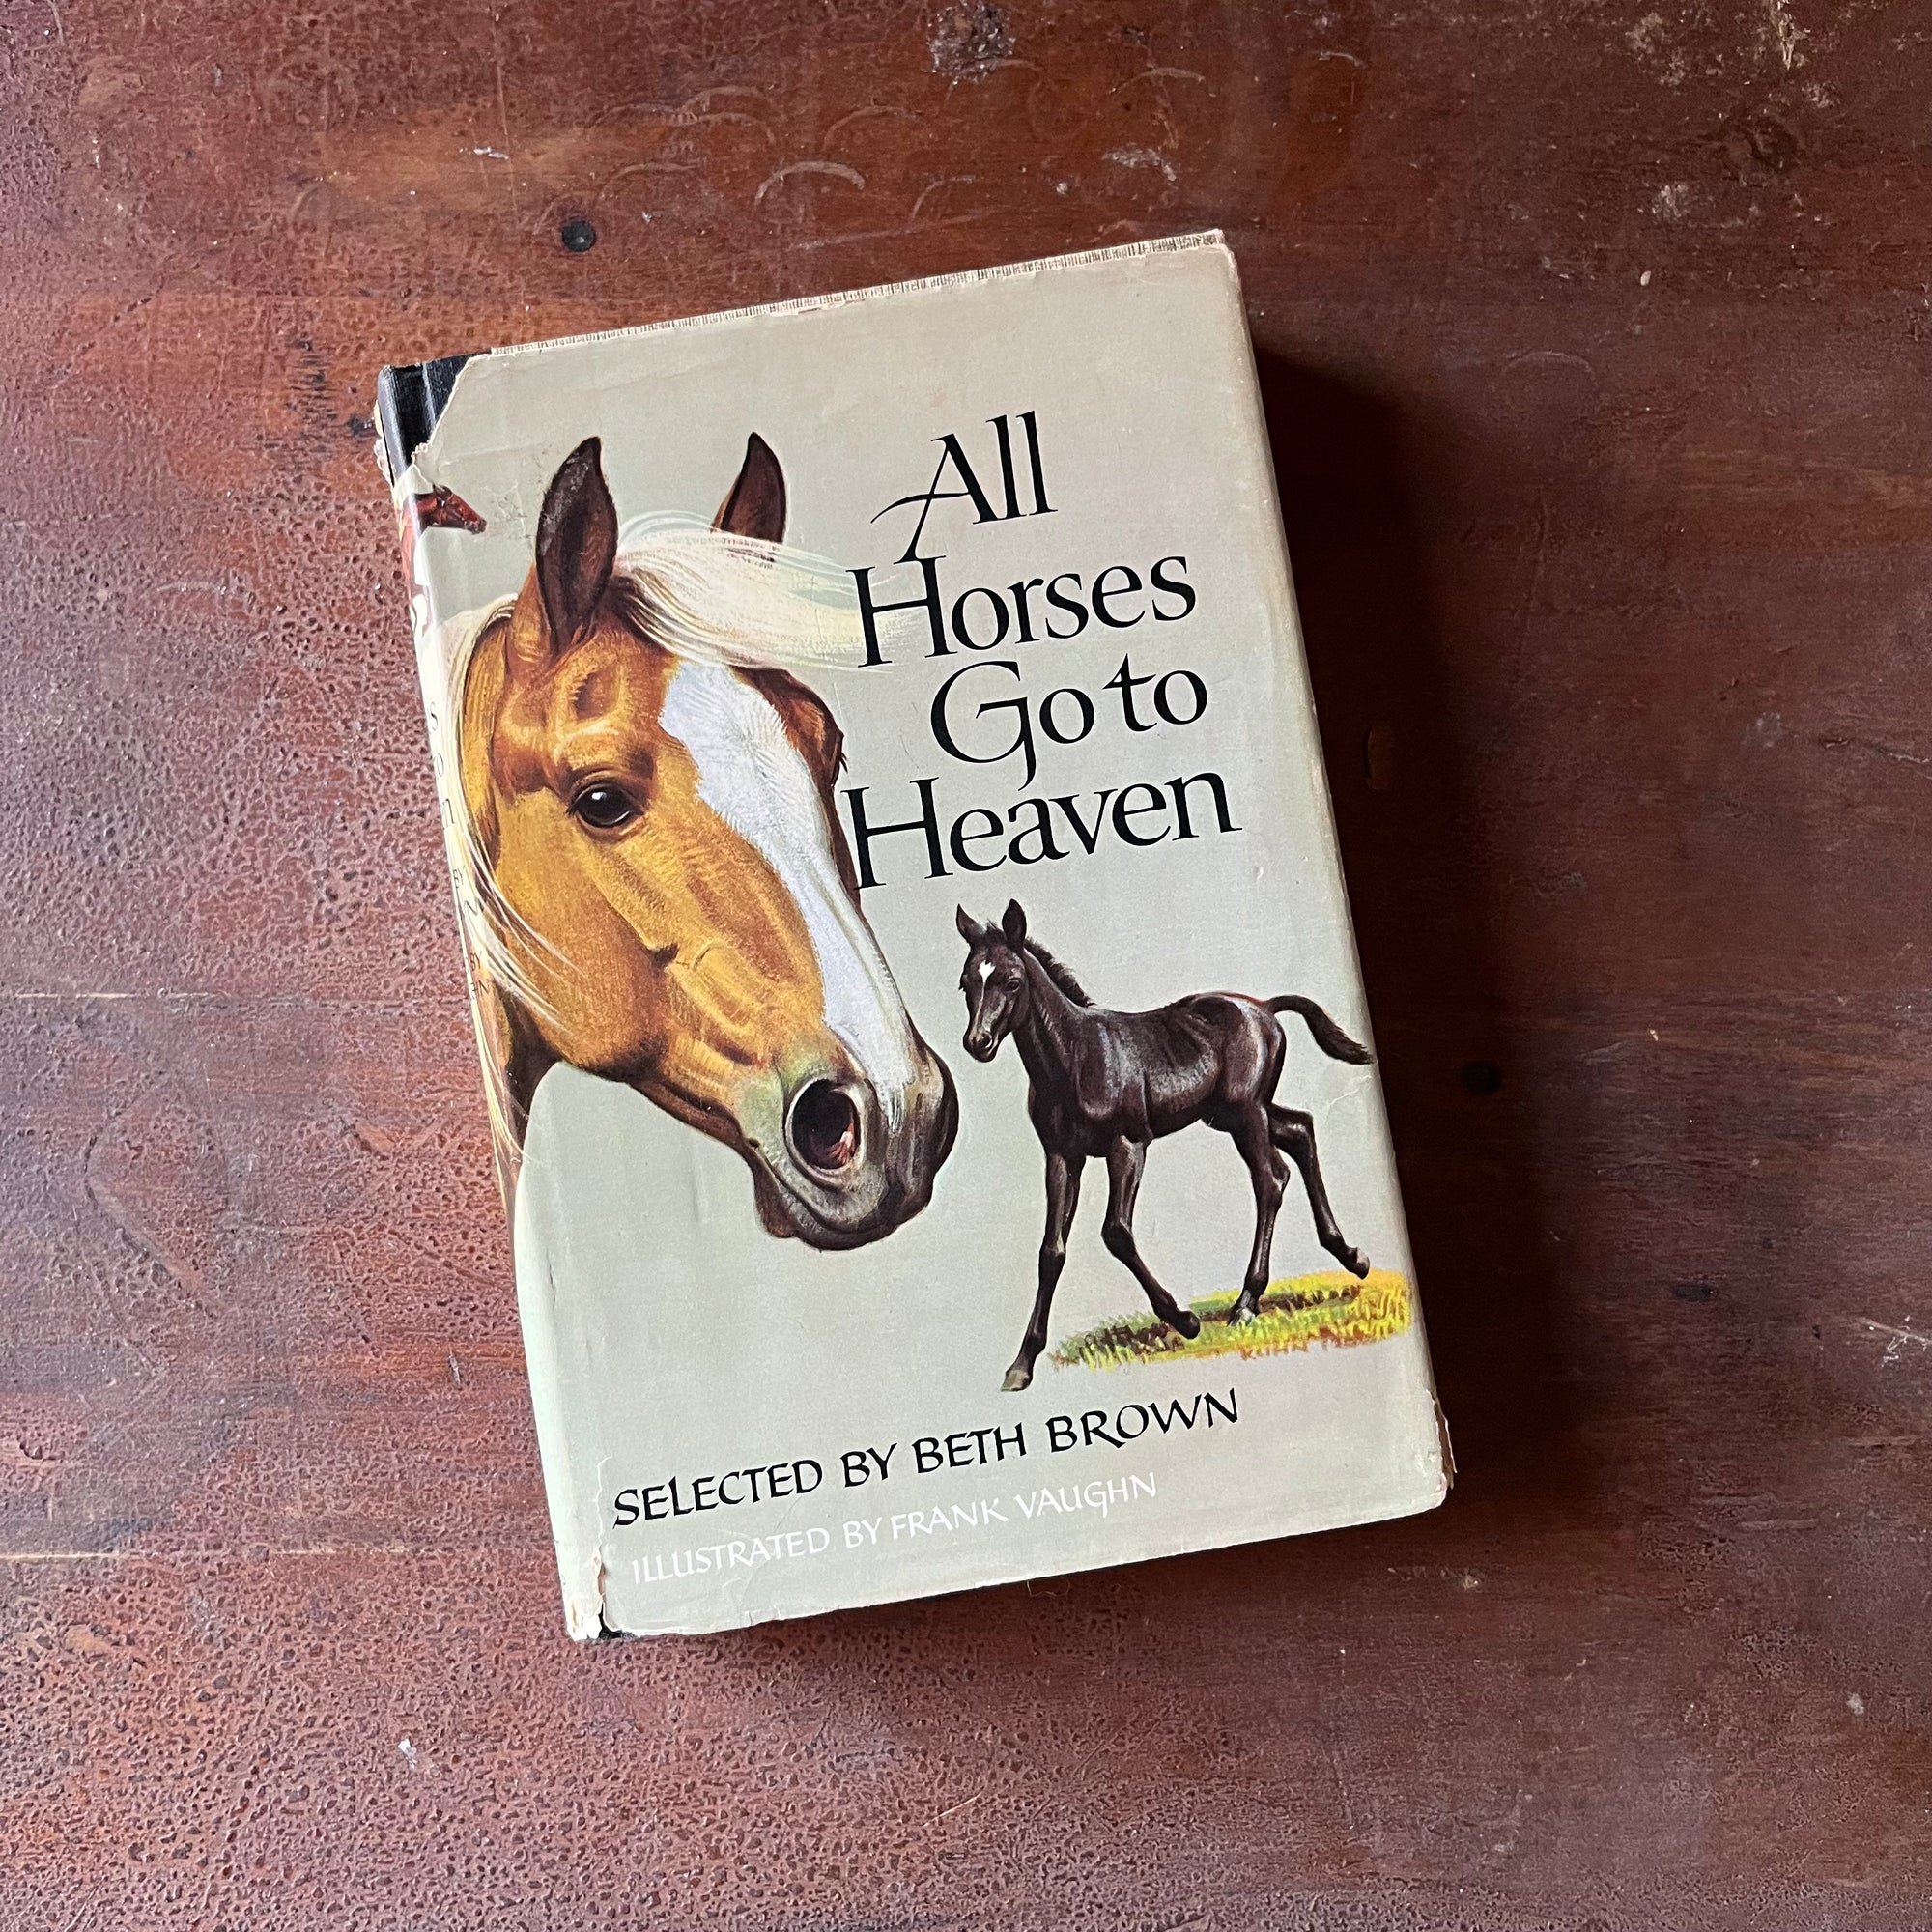 Log Cabin Vintage – vintage children’s book, children’s book, chapter book – All Horses Go To Heaven Selected by Beth Brown - view of the dust jacket's front cover